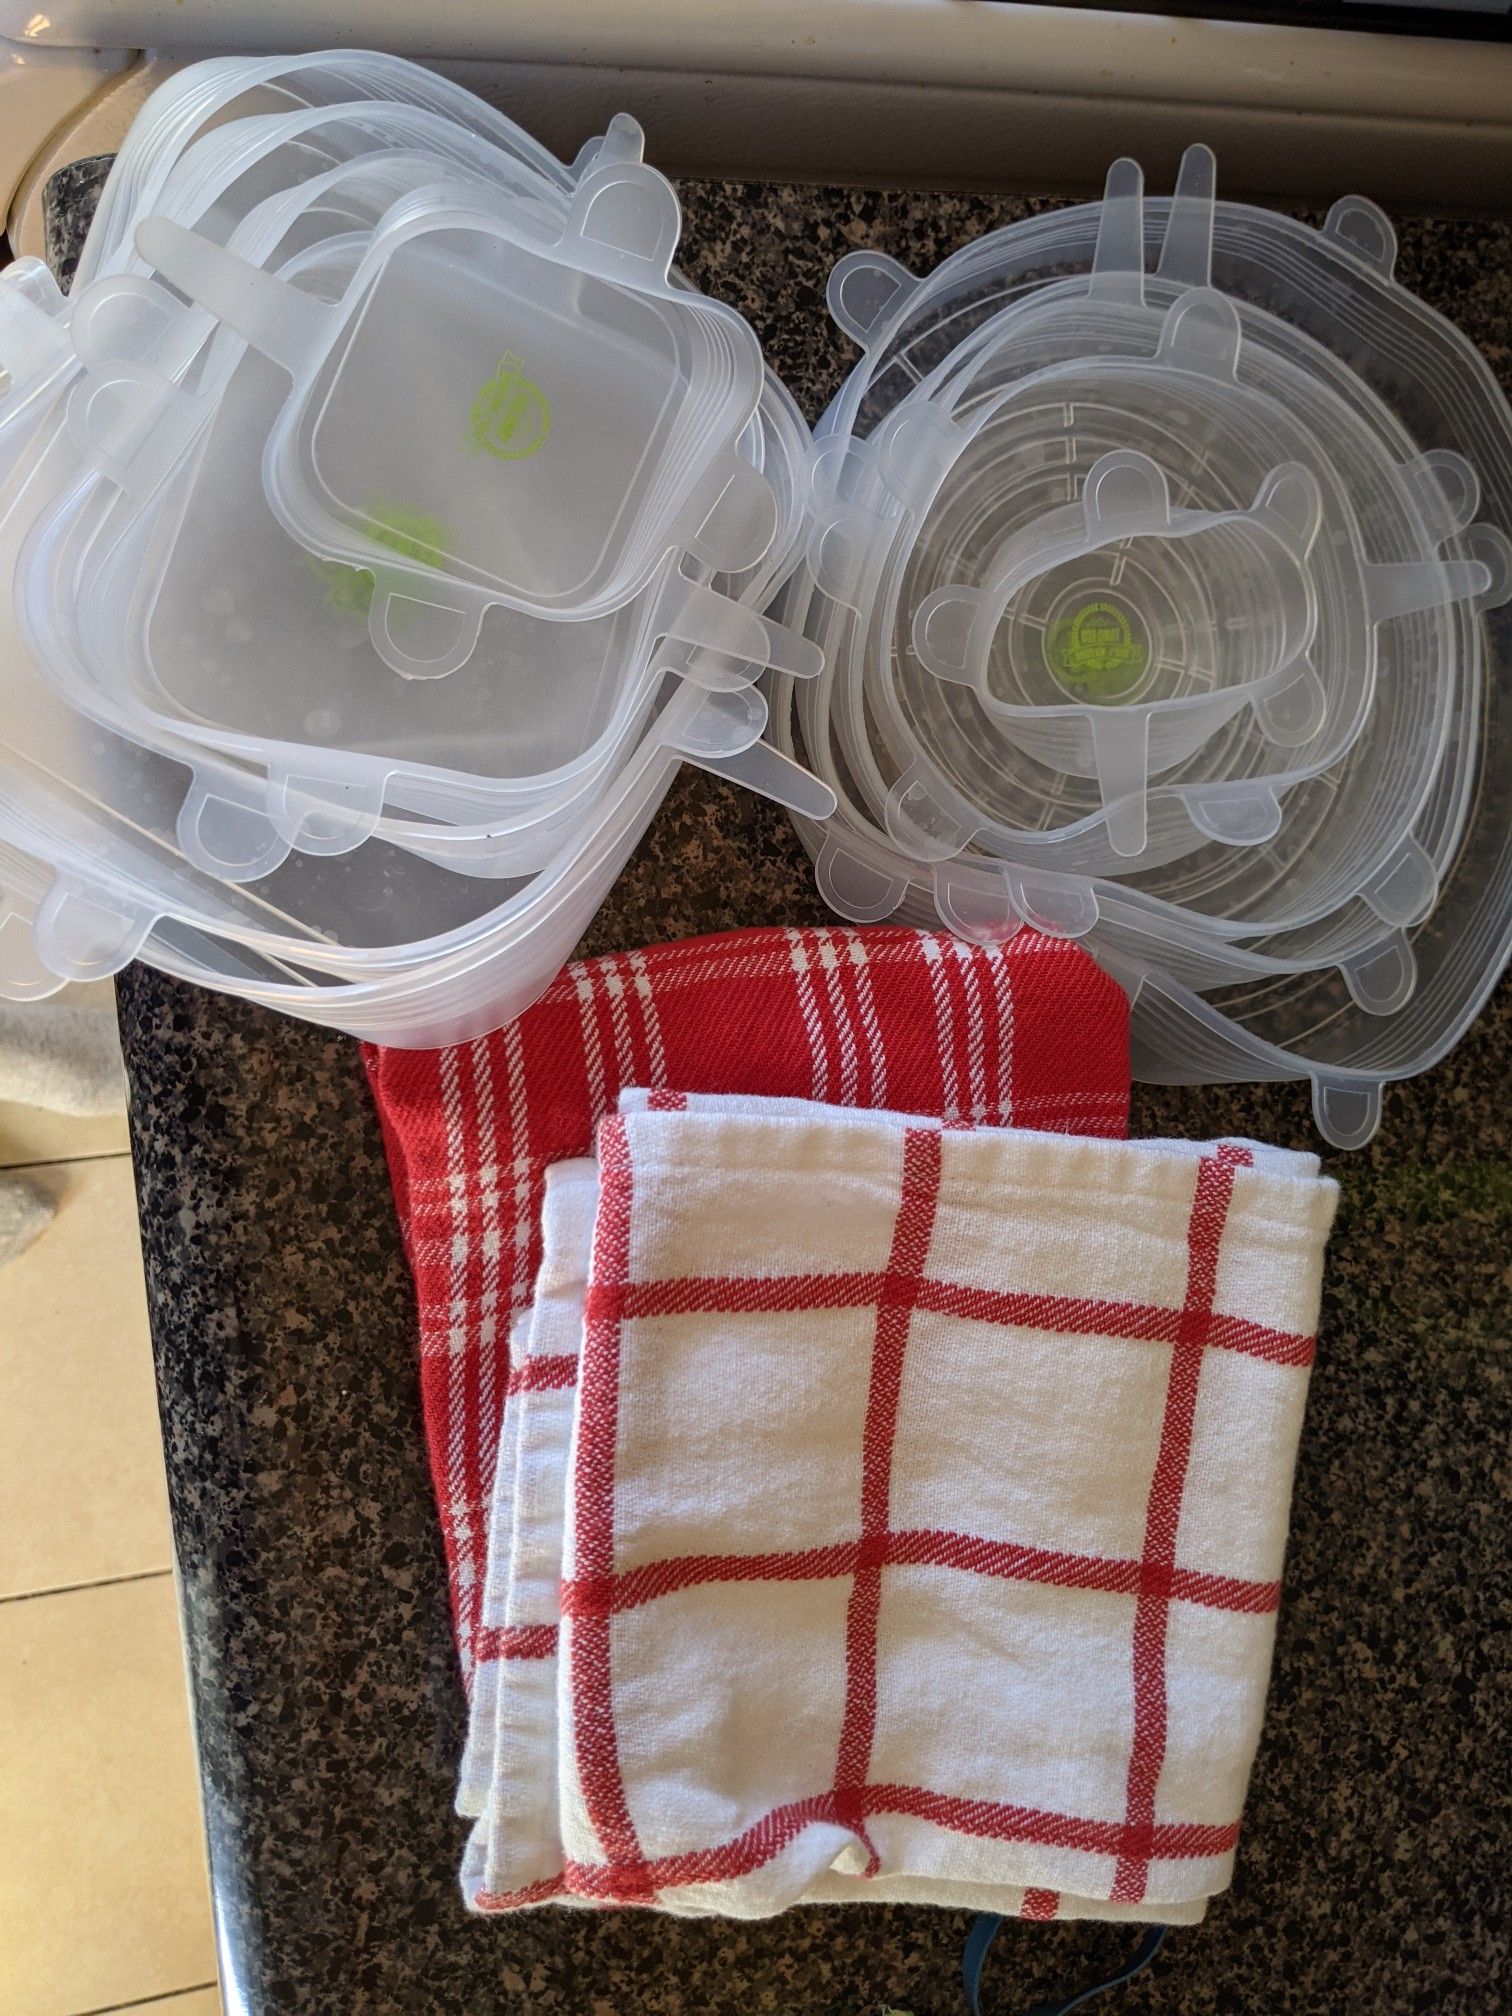 Silicone lids and kitchen towels